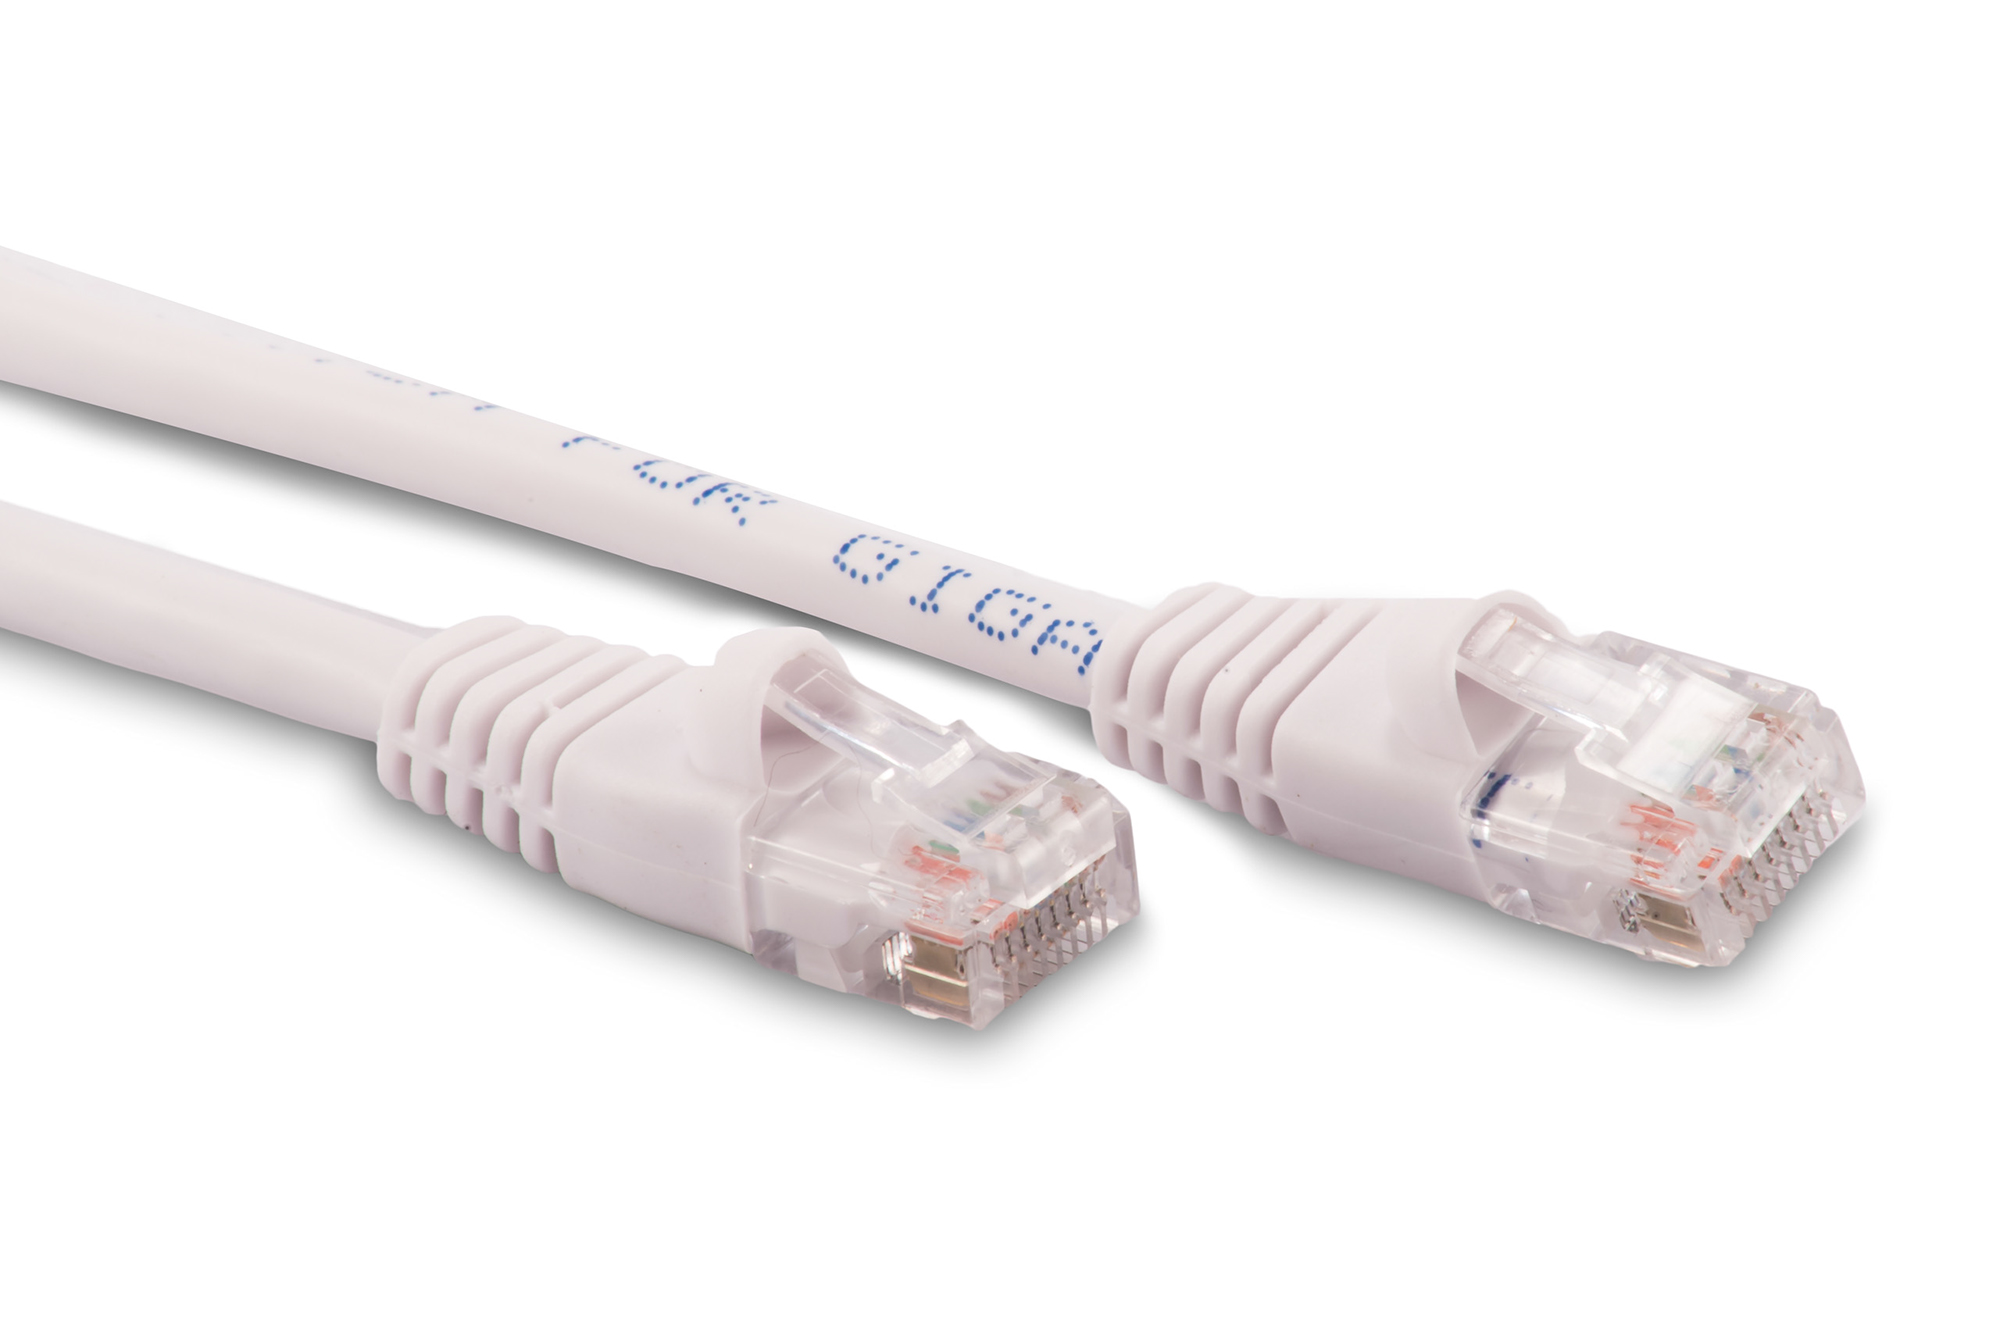 30ft Cat5e Ethernet Patch Cable - White Color - Snagless Boot